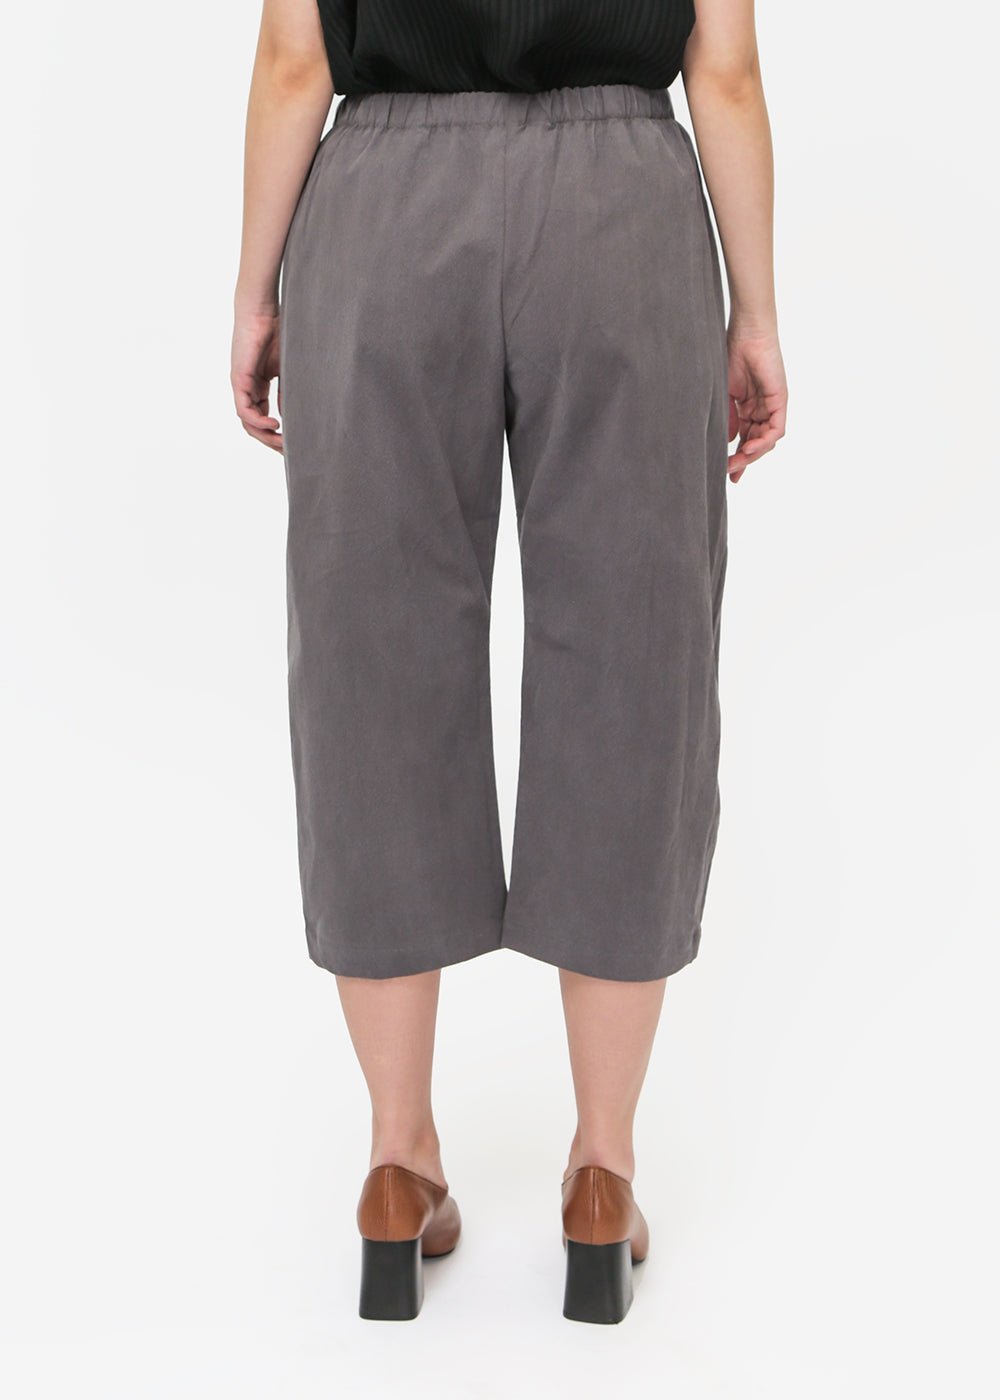 Priory Bow Pant - New Classics Studios Sustainable Ethical Fashion Canada